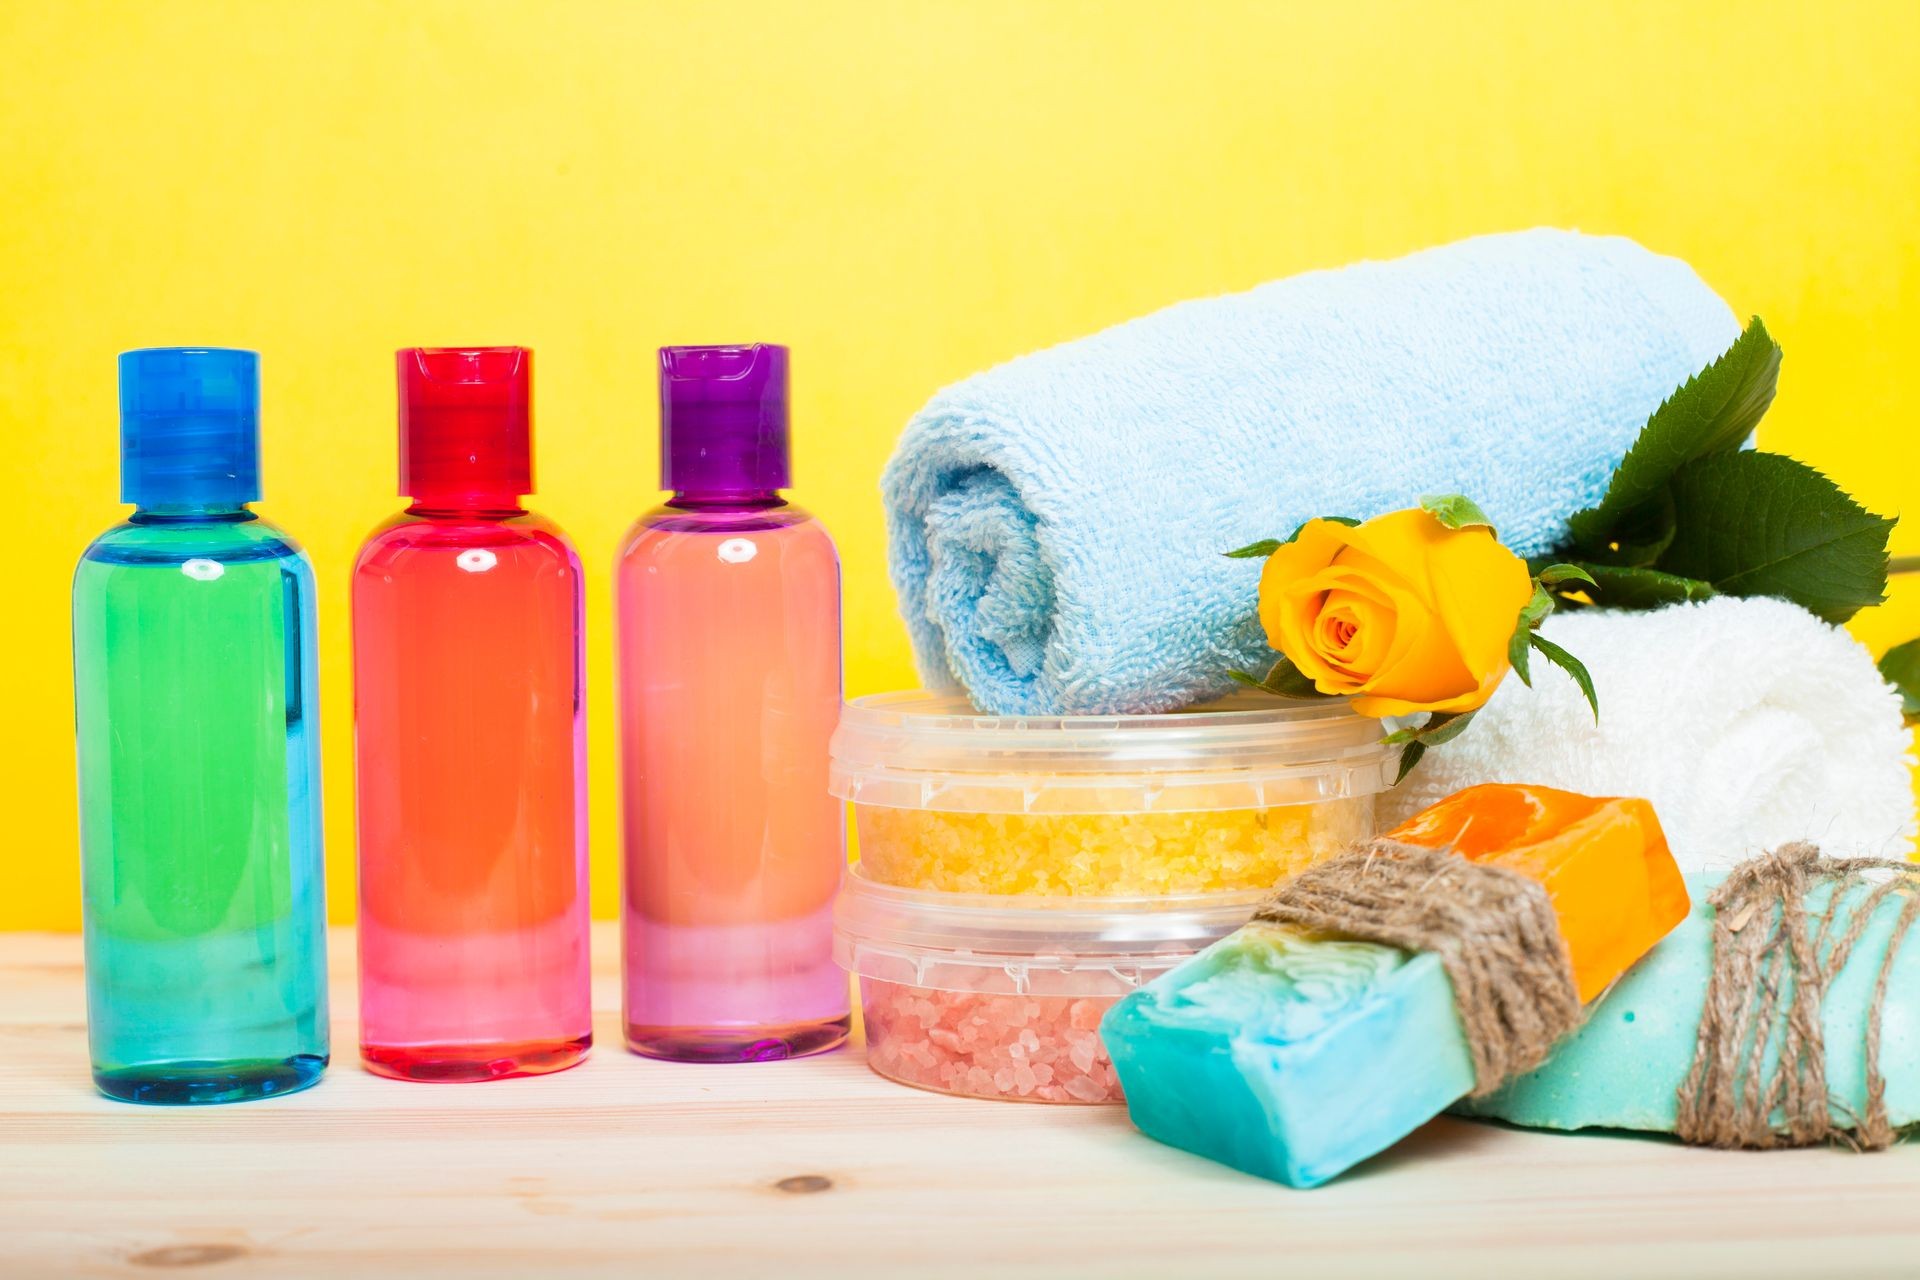 Impact of Phthalates in Plastics and Personal Care Products